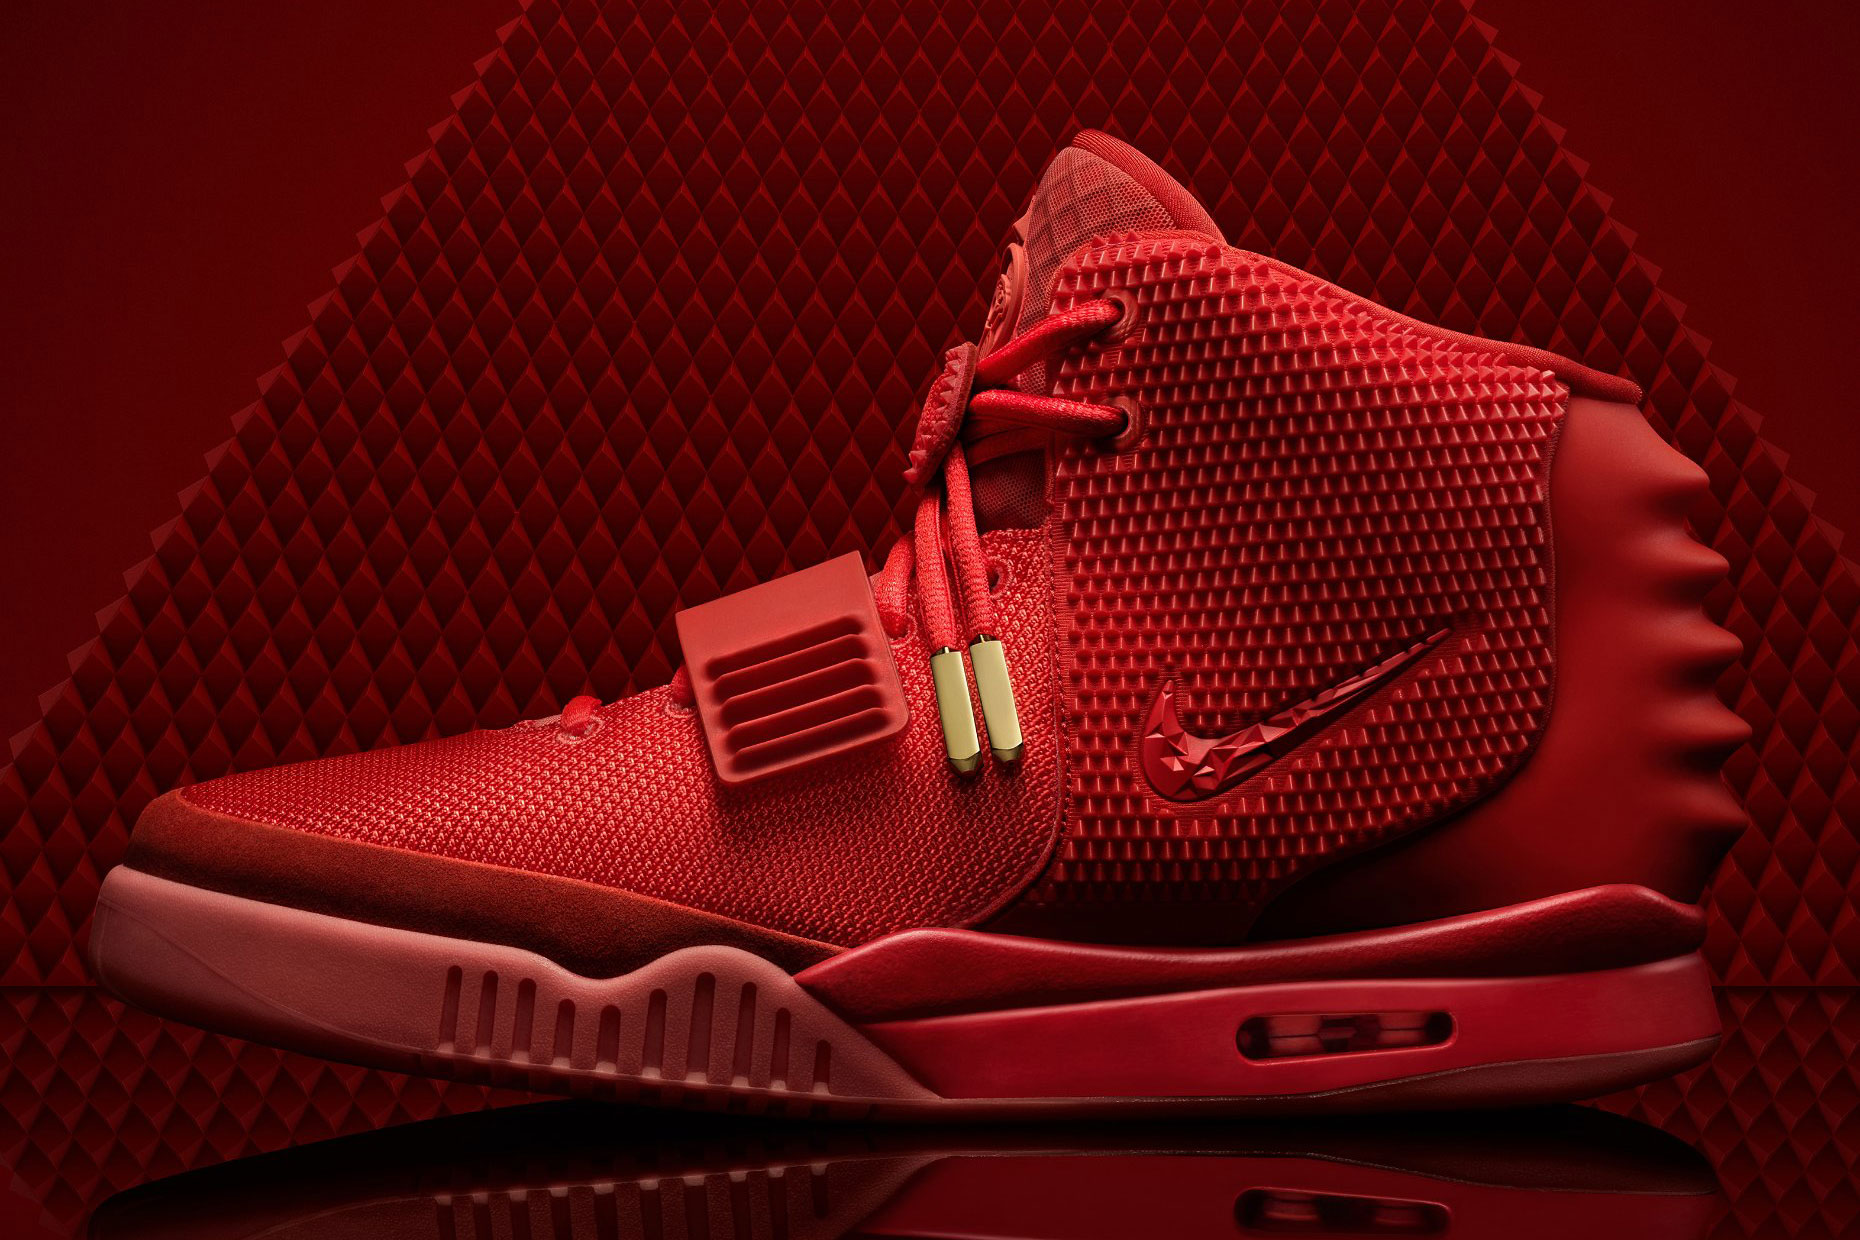 How "Red October" Became The Most Talked About Sneakers Ever | Complex